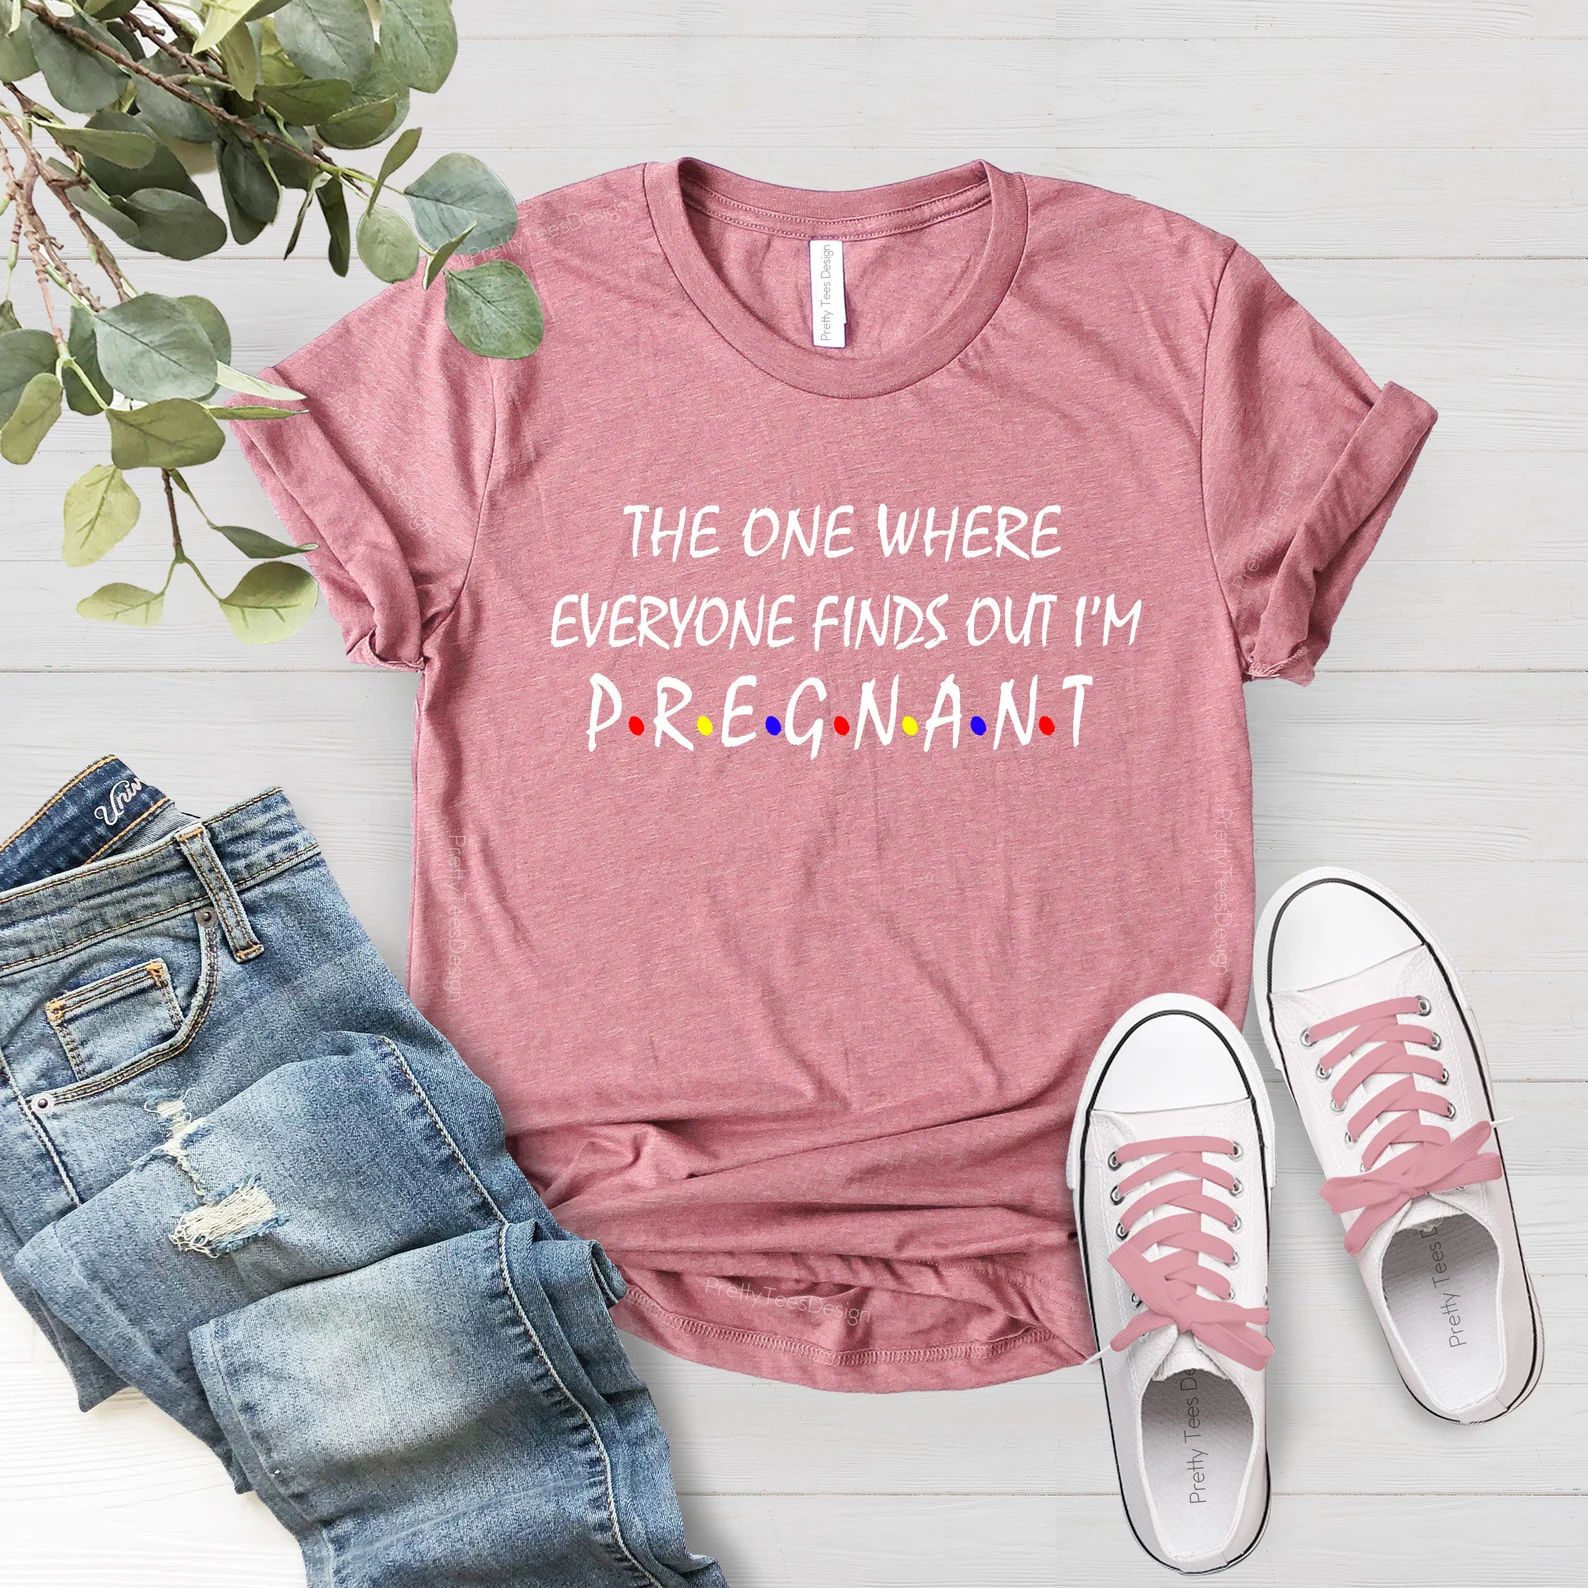 Pink pregnancy announcement t-shirt with jeans and sneakers 